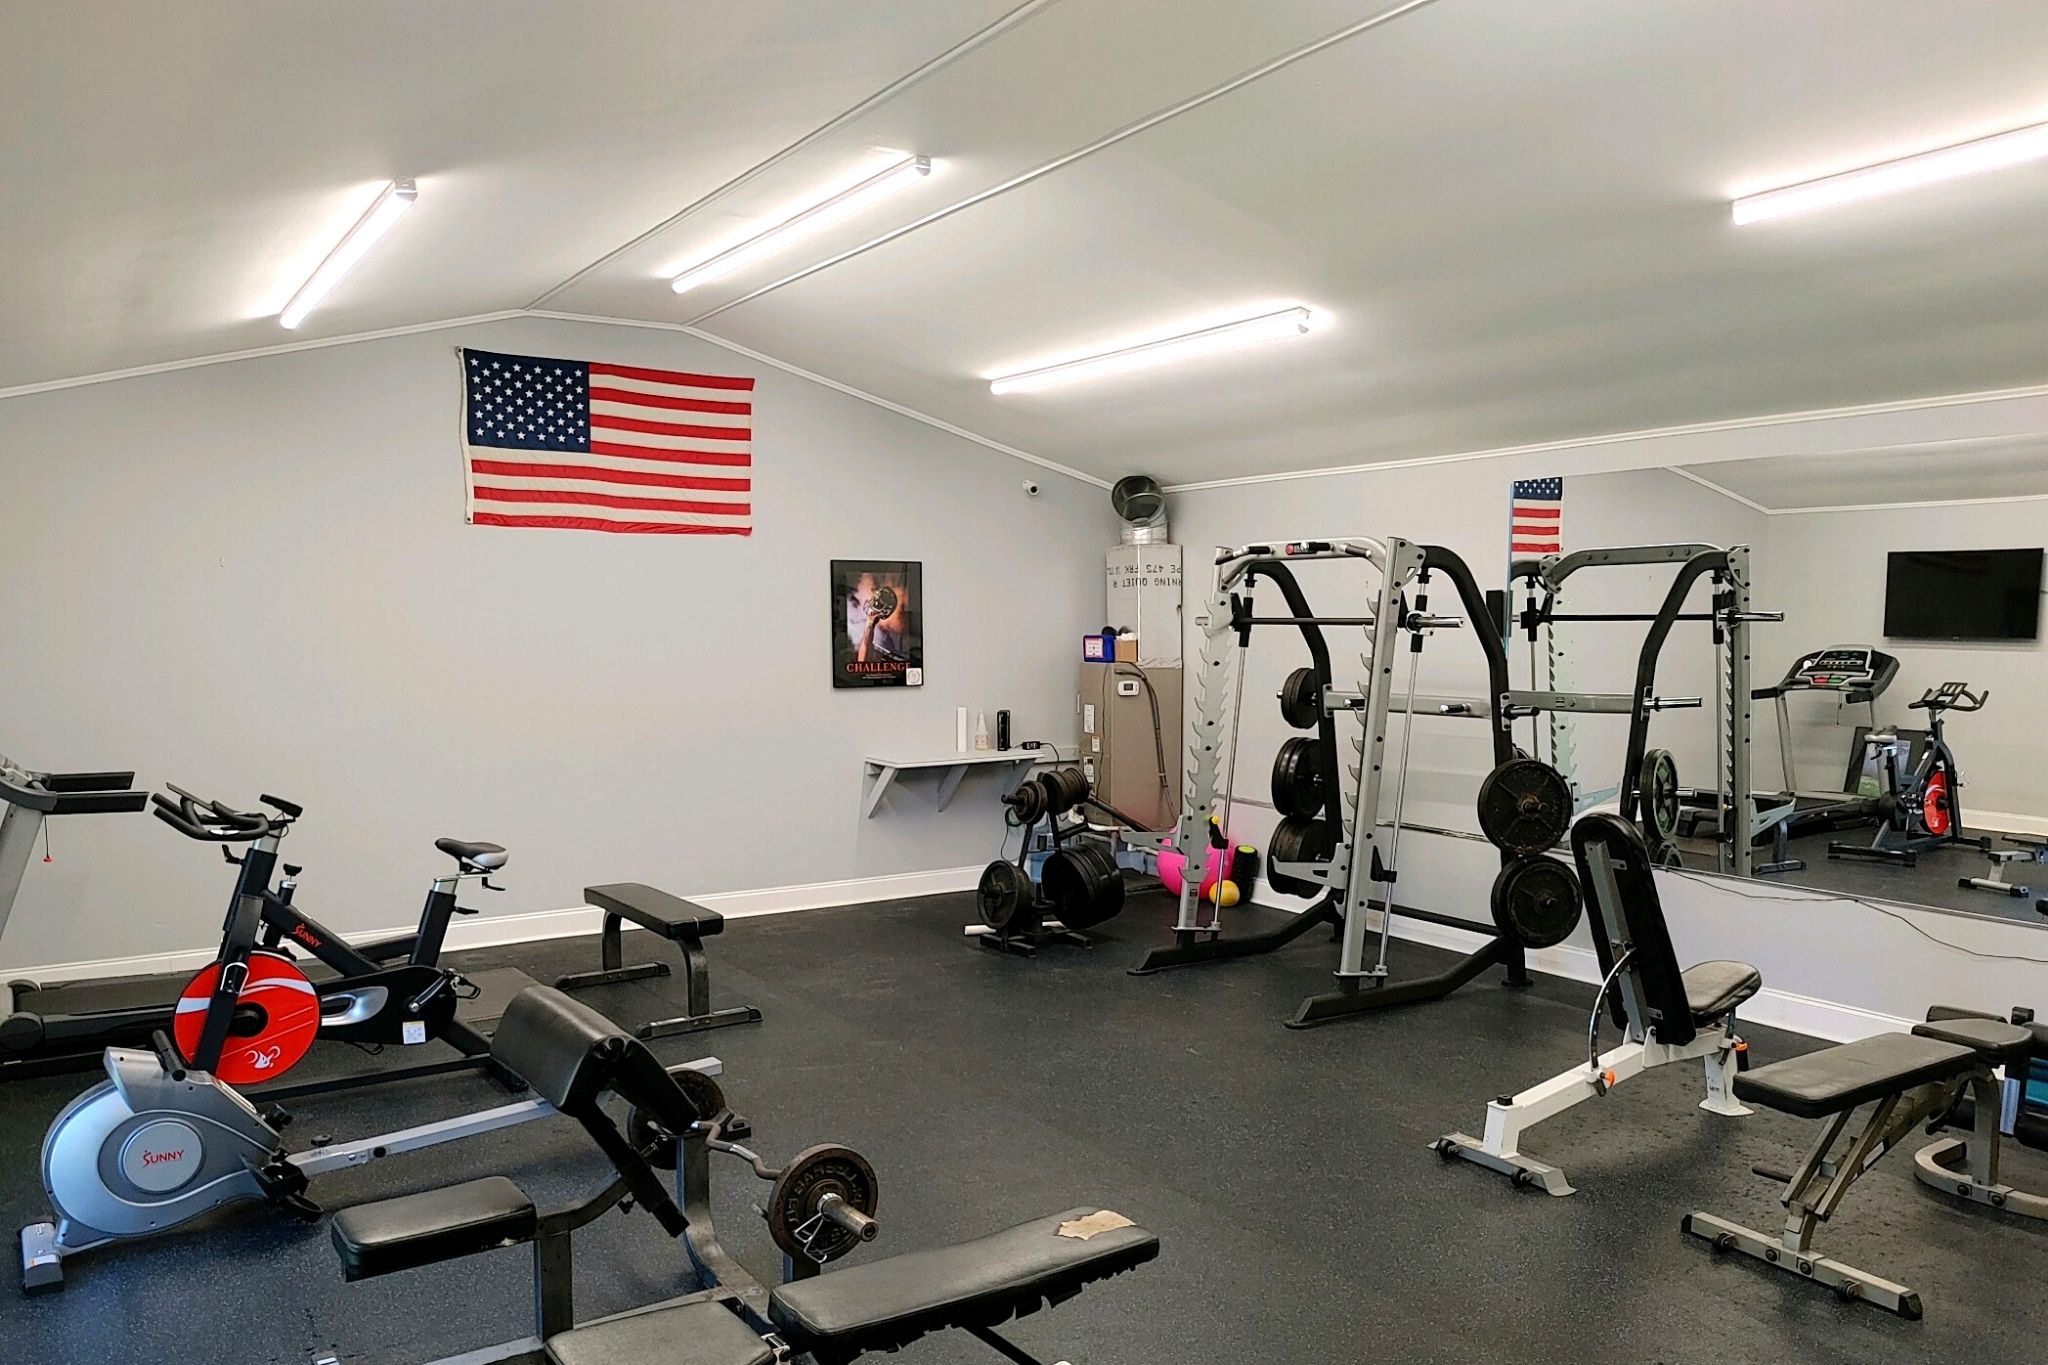 Fitness center at our rehab facility